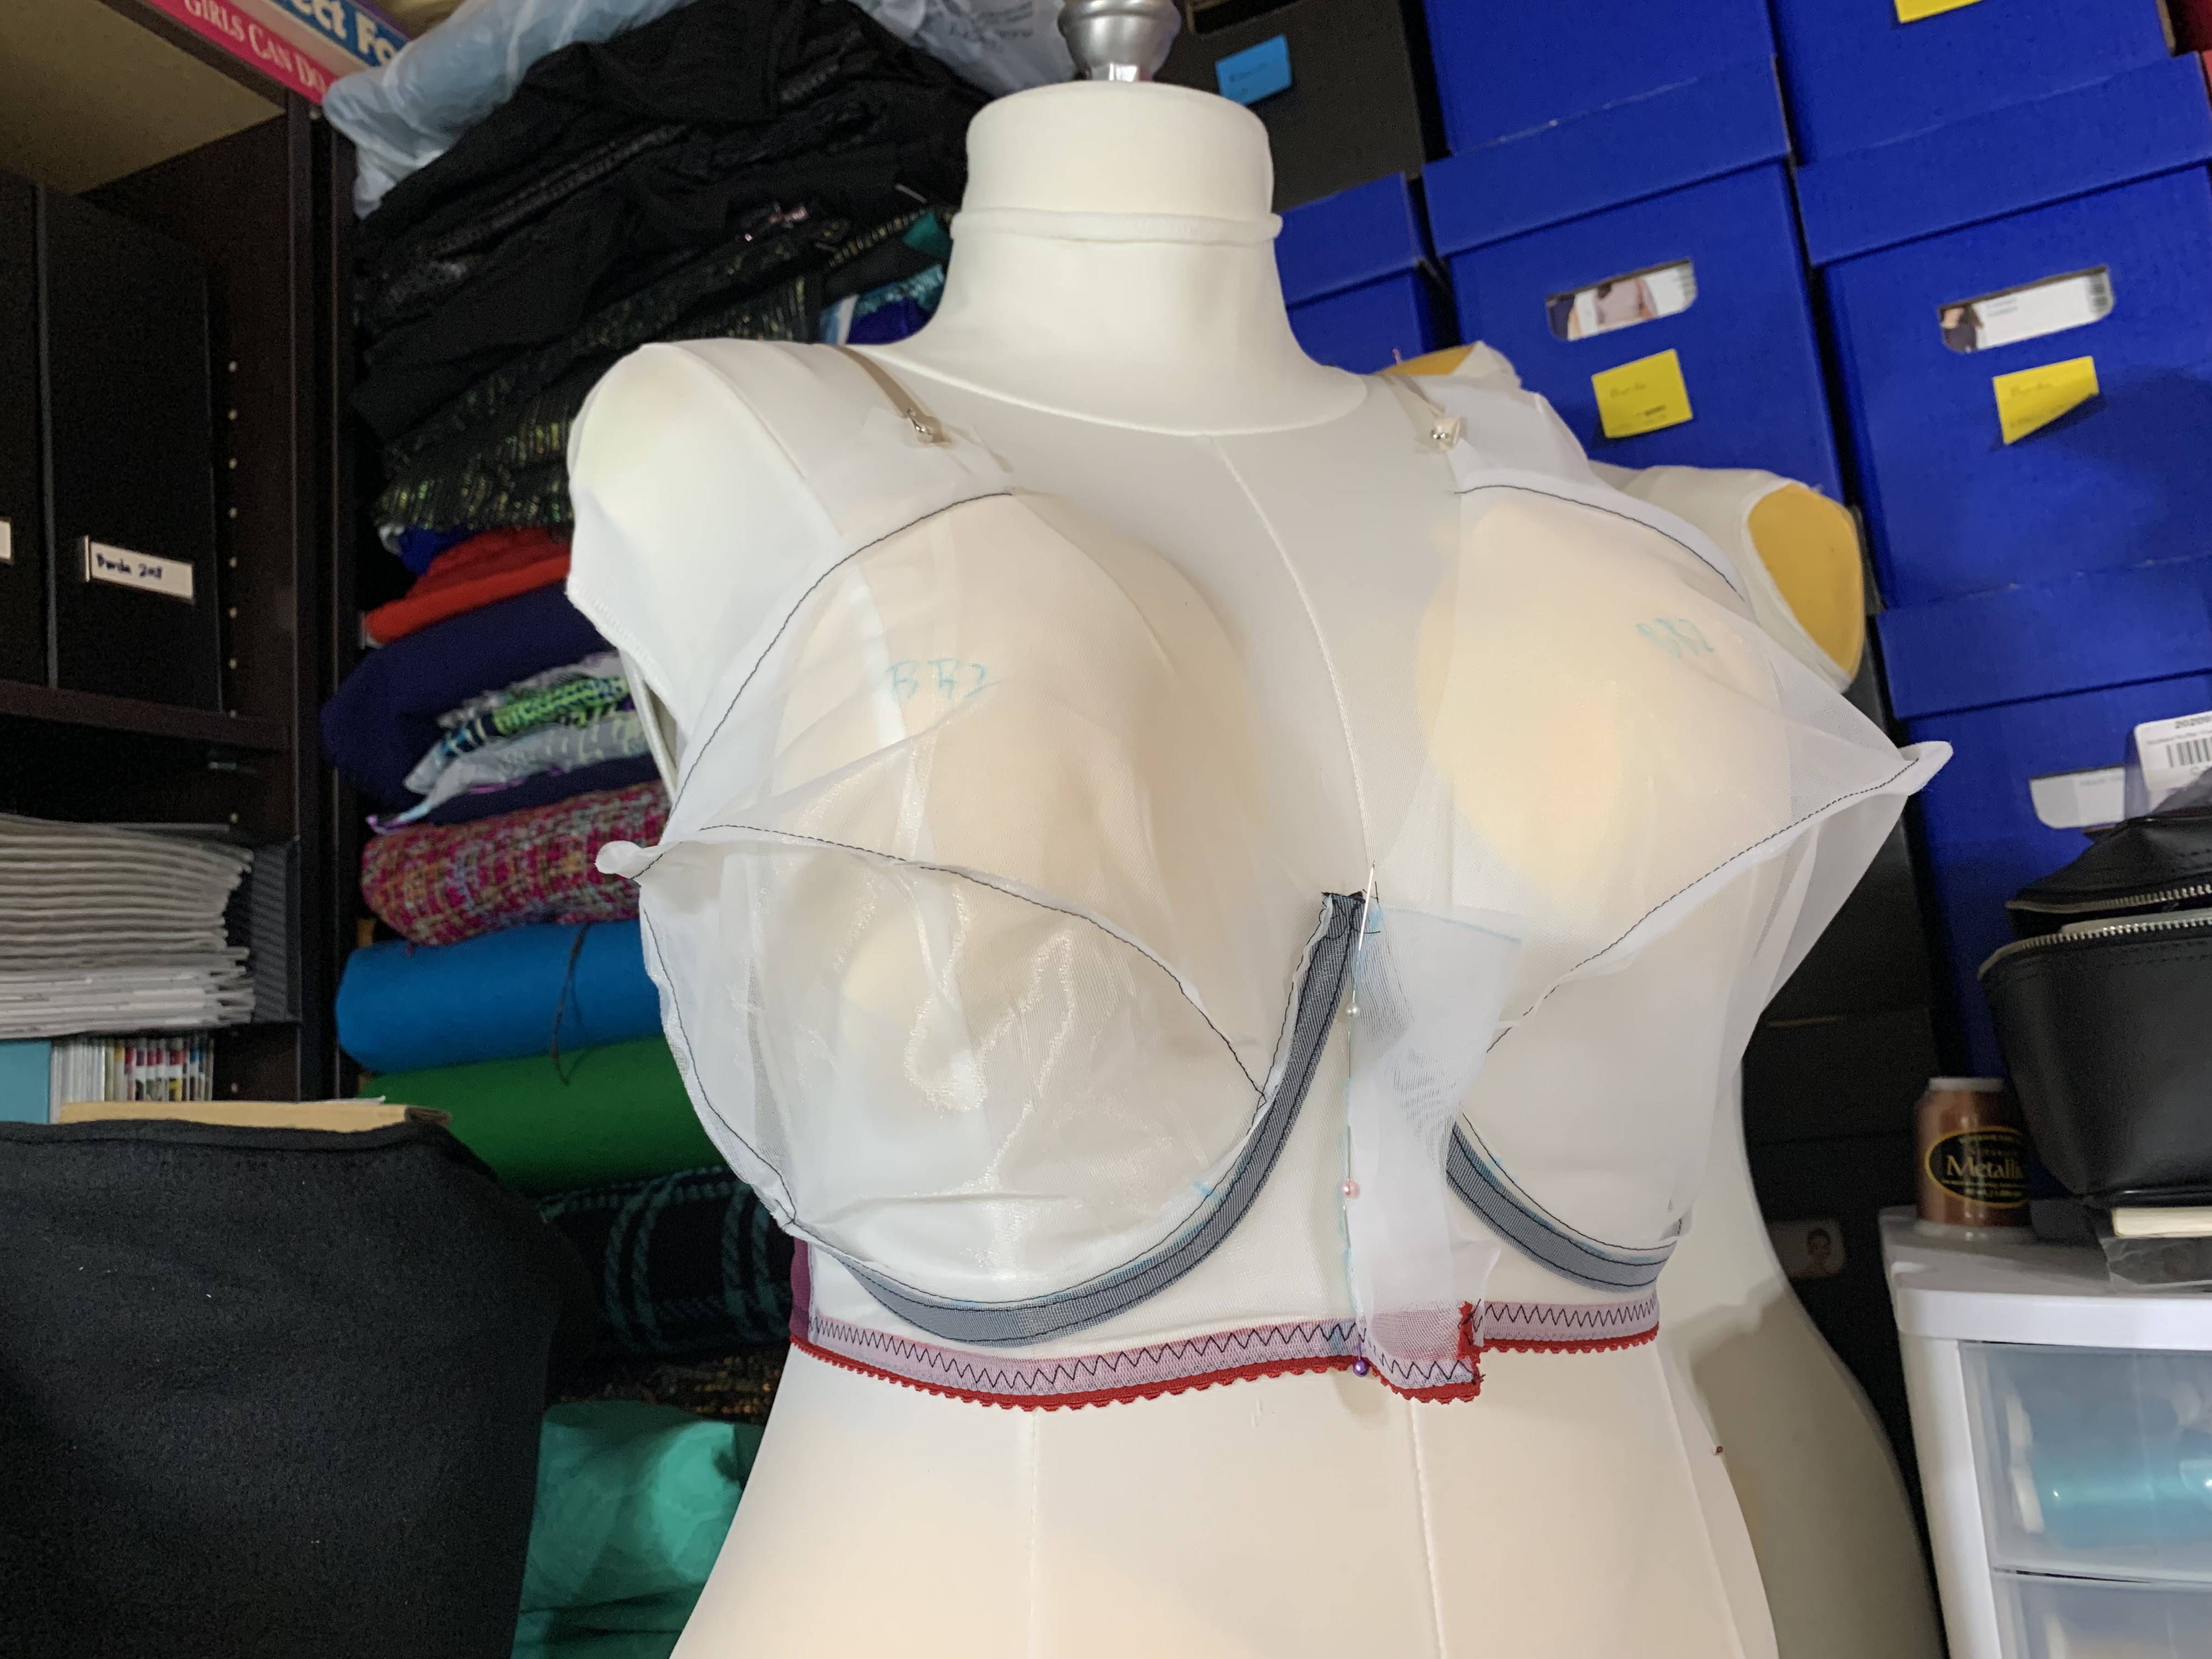 Adventures in Bra Sewing: Part 6 – Comparing Bra Patterns – Doctor